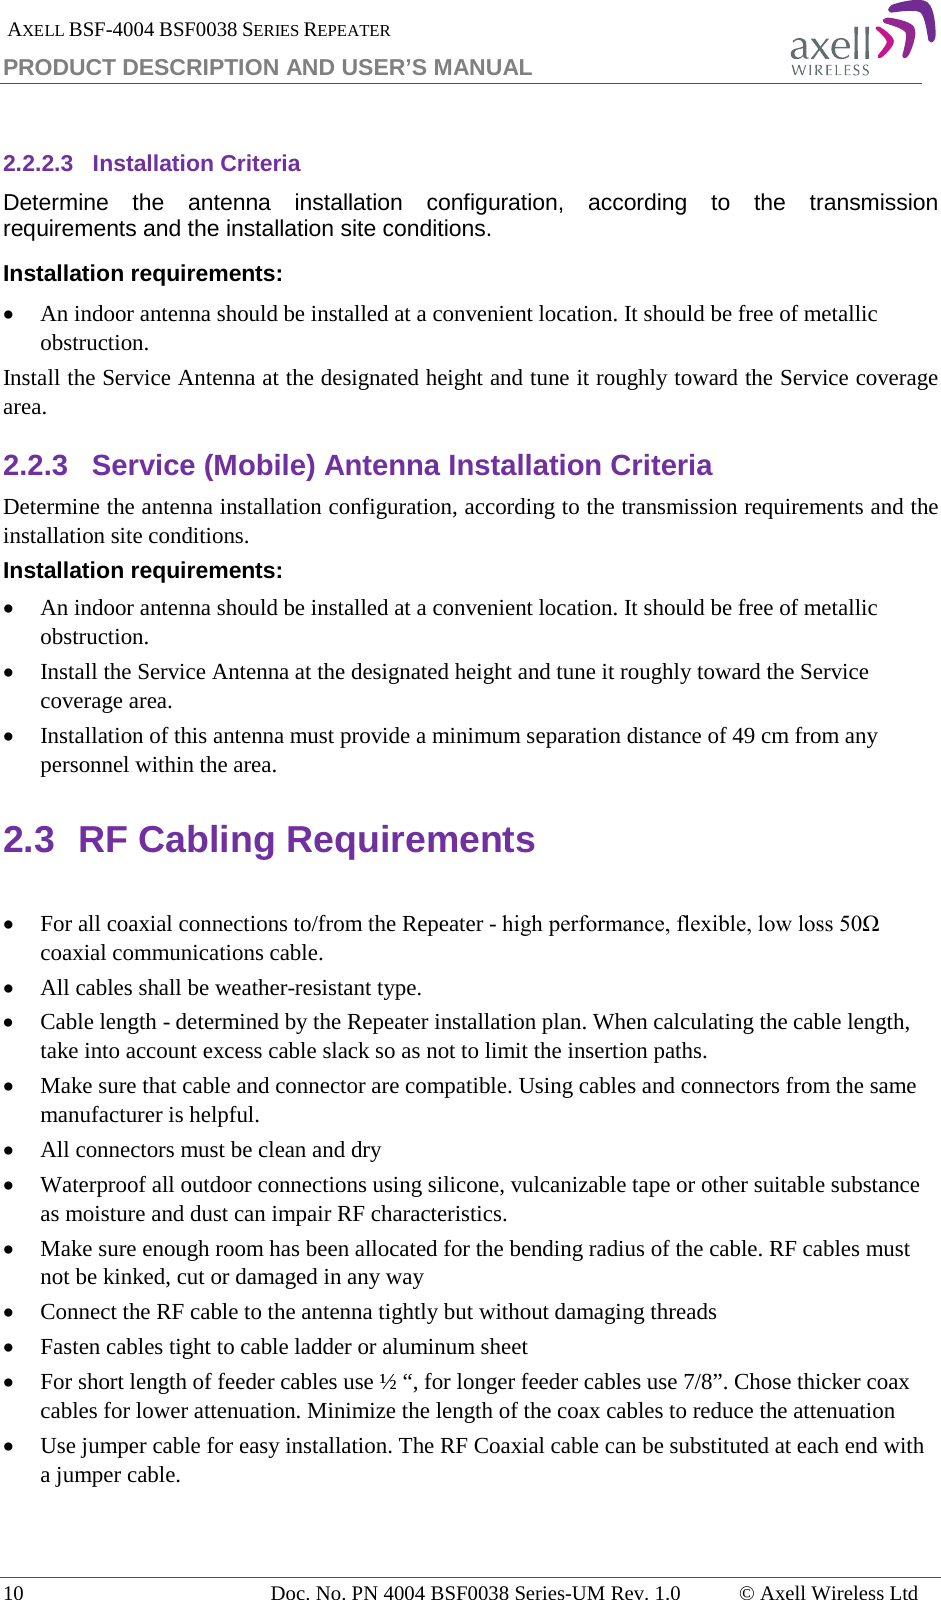  AXELL BSF-4004 BSF0038 SERIES REPEATER PRODUCT DESCRIPTION AND USER’S MANUAL  2.2.2.3 Installation Criteria Determine the antenna installation configuration, according to the transmission requirements and the installation site conditions. Installation requirements: • An indoor antenna should be installed at a convenient location. It should be free of metallic obstruction. Install the Service Antenna at the designated height and tune it roughly toward the Service coverage area. 2.2.3 Service (Mobile) Antenna Installation Criteria Determine the antenna installation configuration, according to the transmission requirements and the installation site conditions. Installation requirements: • An indoor antenna should be installed at a convenient location. It should be free of metallic obstruction. • Install the Service Antenna at the designated height and tune it roughly toward the Service coverage area. • Installation of this antenna must provide a minimum separation distance of 49 cm from any personnel within the area. 2.3 RF Cabling Requirements  • For all coaxial connections to/from the Repeater - high performance, flexible, low loss 50Ω coaxial communications cable.  • All cables shall be weather-resistant type.  • Cable length - determined by the Repeater installation plan. When calculating the cable length, take into account excess cable slack so as not to limit the insertion paths. • Make sure that cable and connector are compatible. Using cables and connectors from the same manufacturer is helpful. • All connectors must be clean and dry • Waterproof all outdoor connections using silicone, vulcanizable tape or other suitable substance as moisture and dust can impair RF characteristics.  • Make sure enough room has been allocated for the bending radius of the cable. RF cables must not be kinked, cut or damaged in any way • Connect the RF cable to the antenna tightly but without damaging threads • Fasten cables tight to cable ladder or aluminum sheet • For short length of feeder cables use ½ “, for longer feeder cables use 7/8”. Chose thicker coax cables for lower attenuation. Minimize the length of the coax cables to reduce the attenuation  • Use jumper cable for easy installation. The RF Coaxial cable can be substituted at each end with a jumper cable.  10 Doc. No. PN 4004 BSF0038 Series-UM Rev. 1.0  © Axell Wireless Ltd 